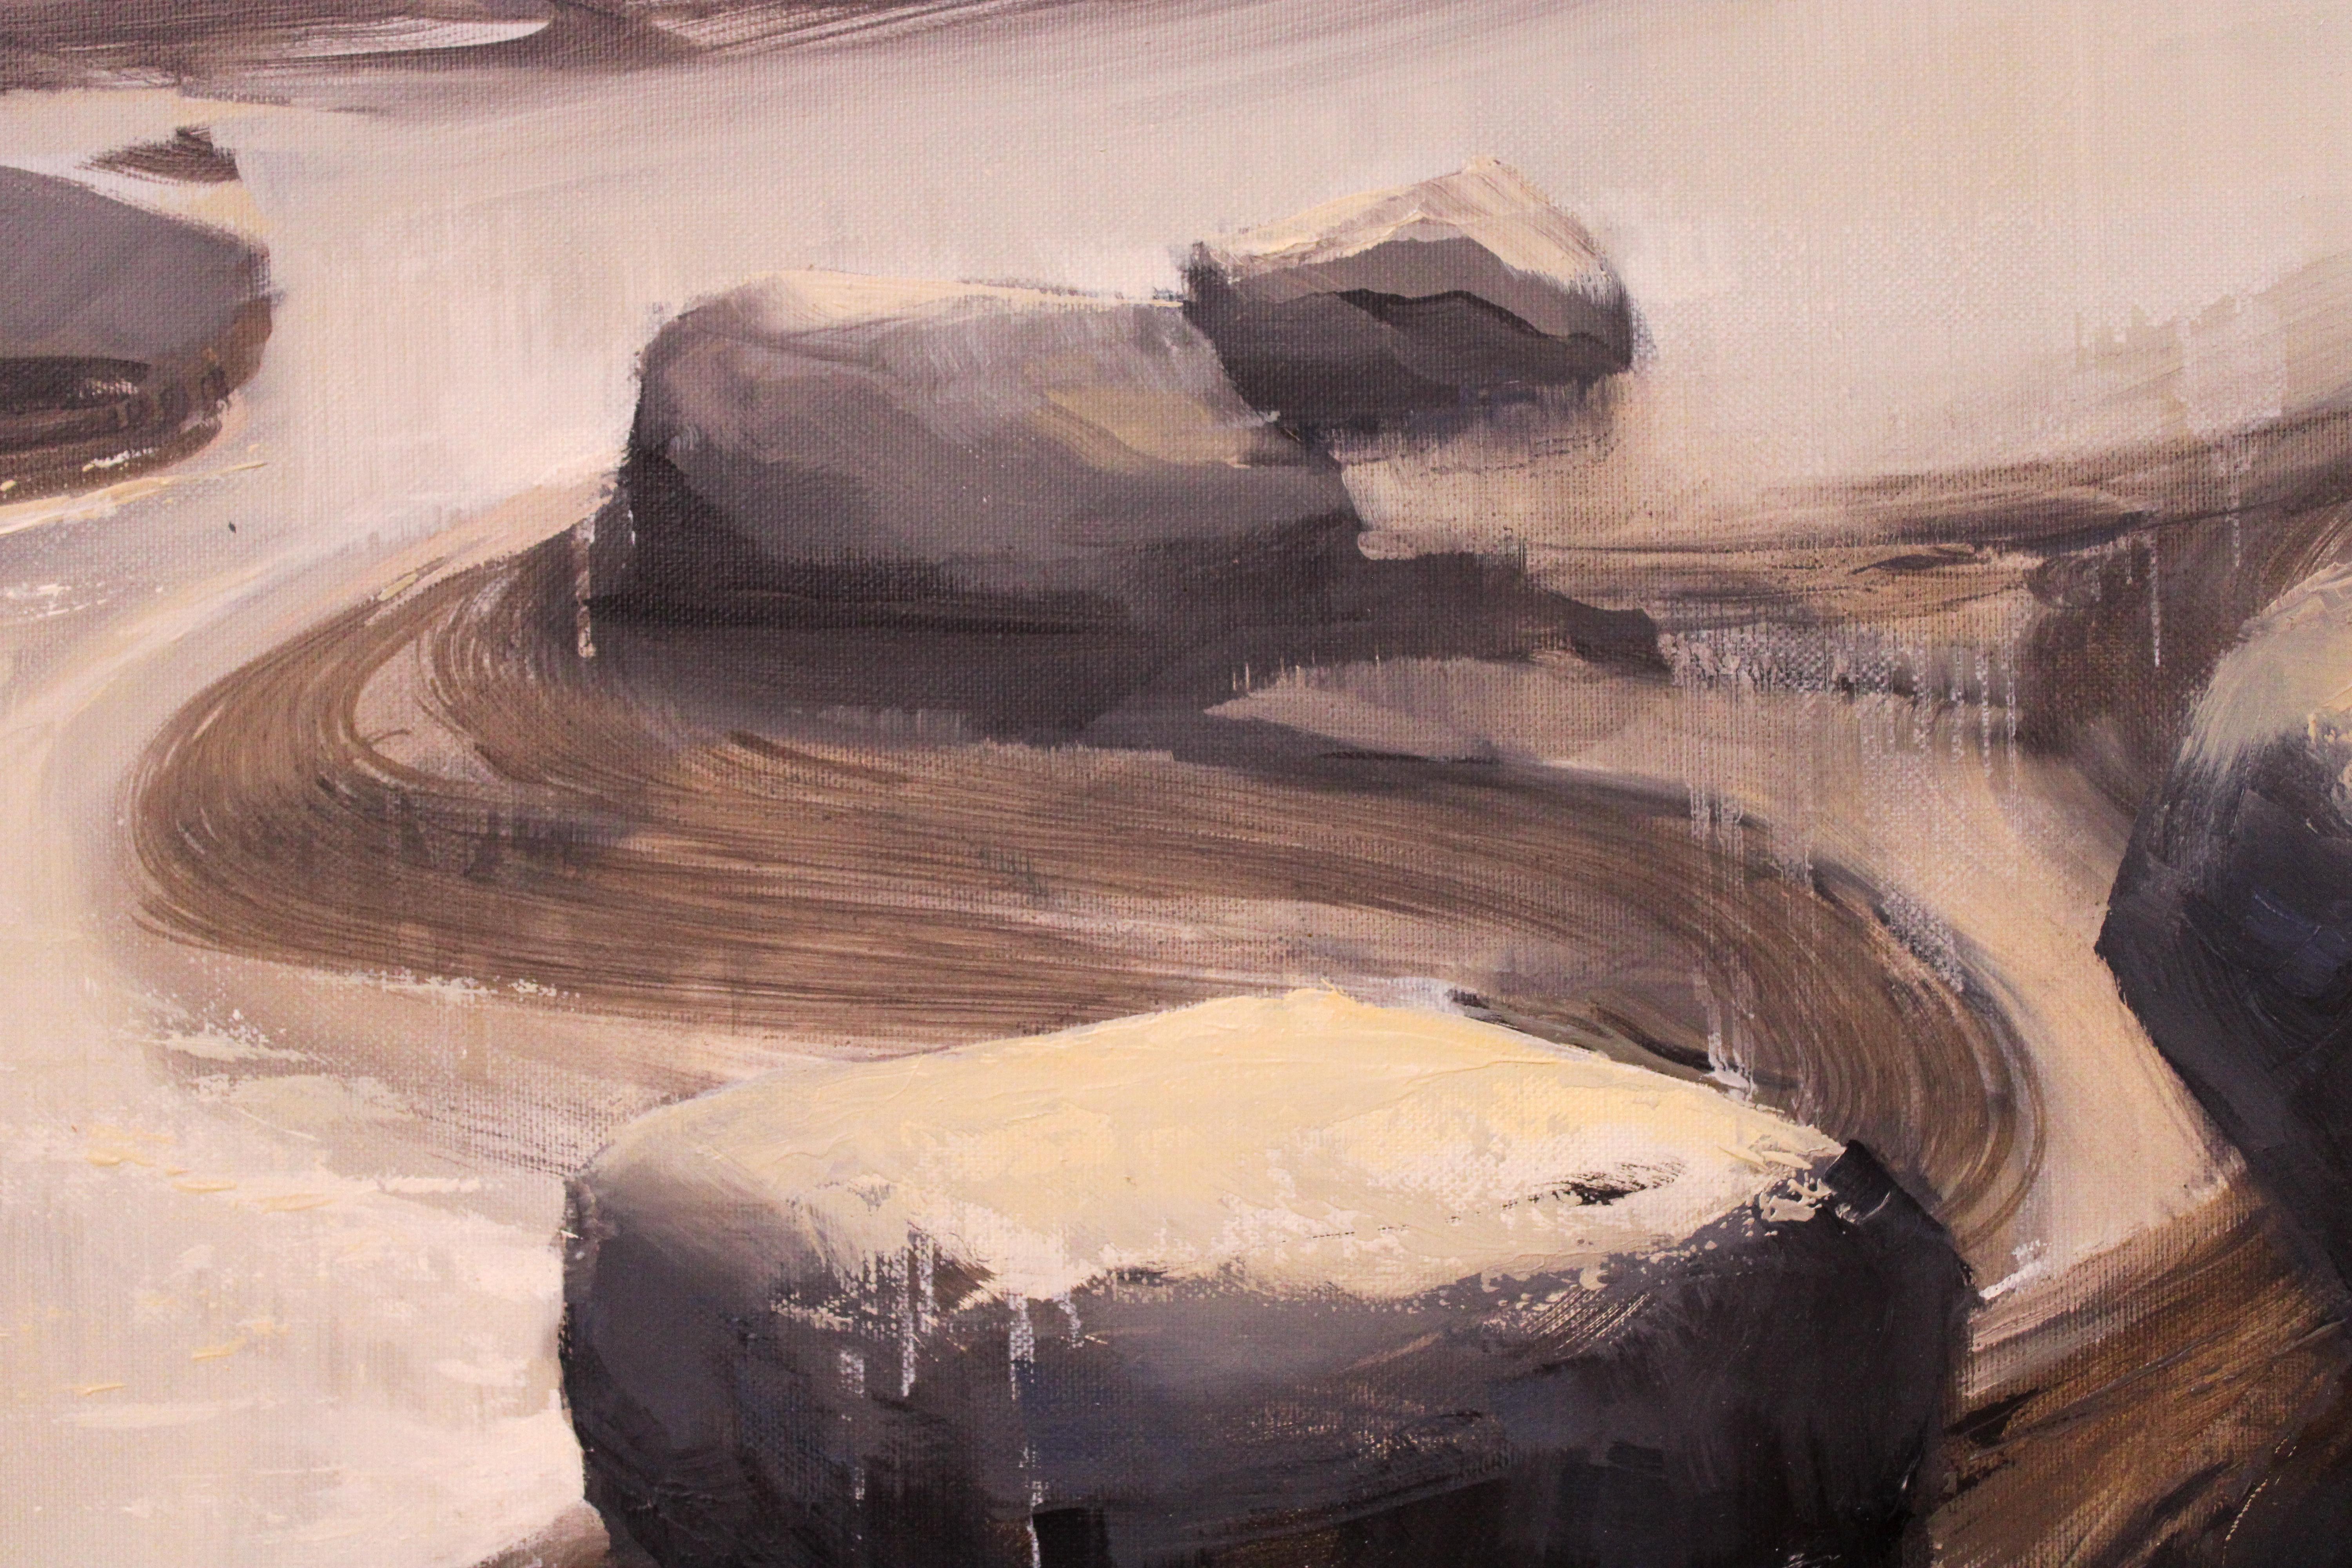 River Bank - 21st Century Contemporary Oil Landscape with Water and Rocks - Painting by Marein Konijn